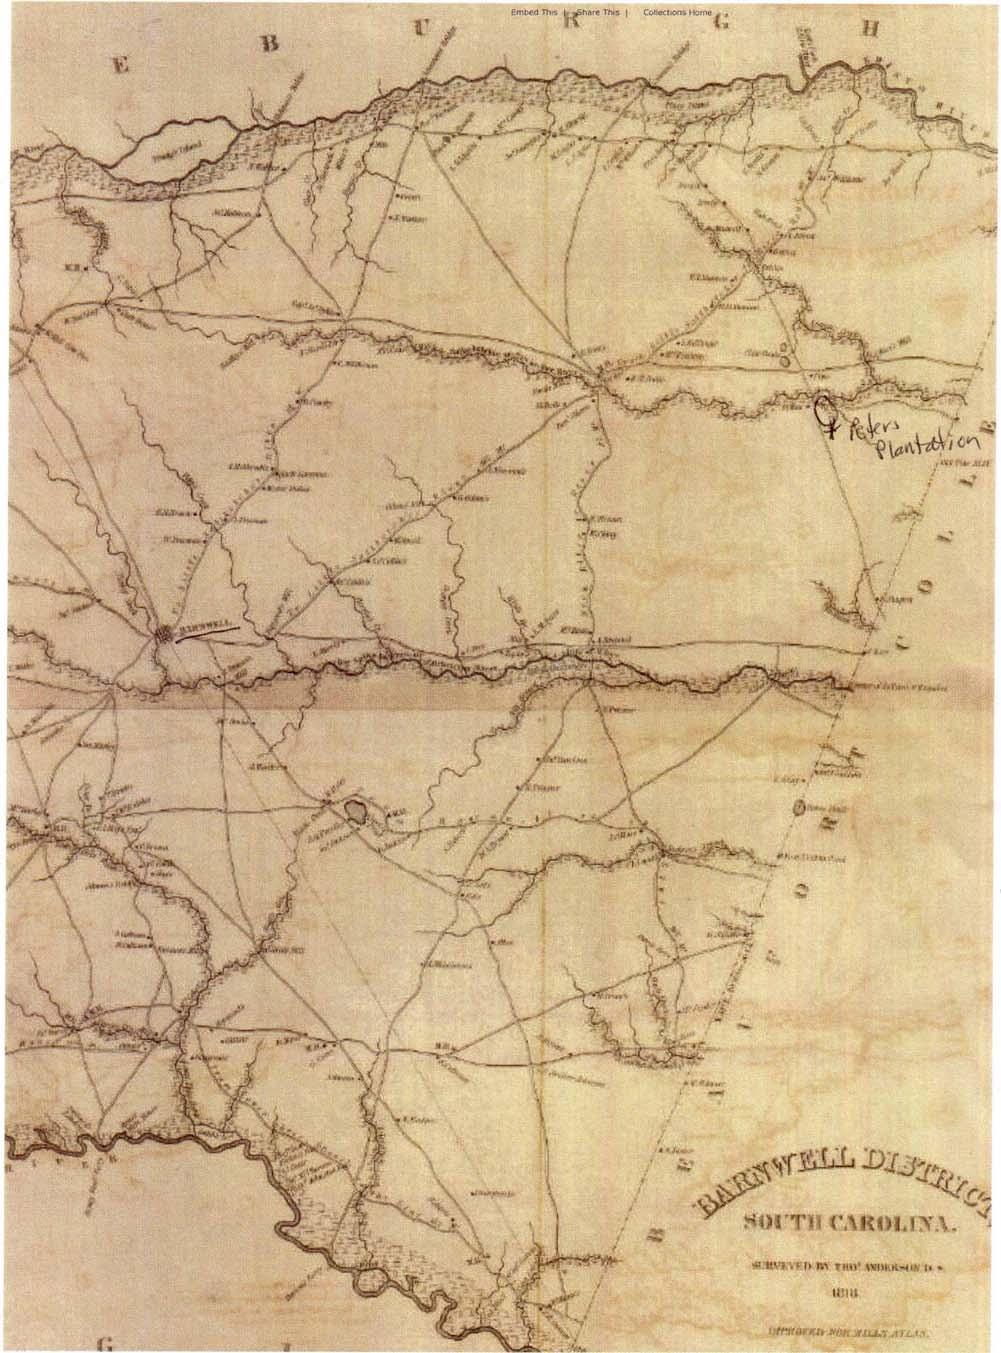 Above map is from 1818 and shows where